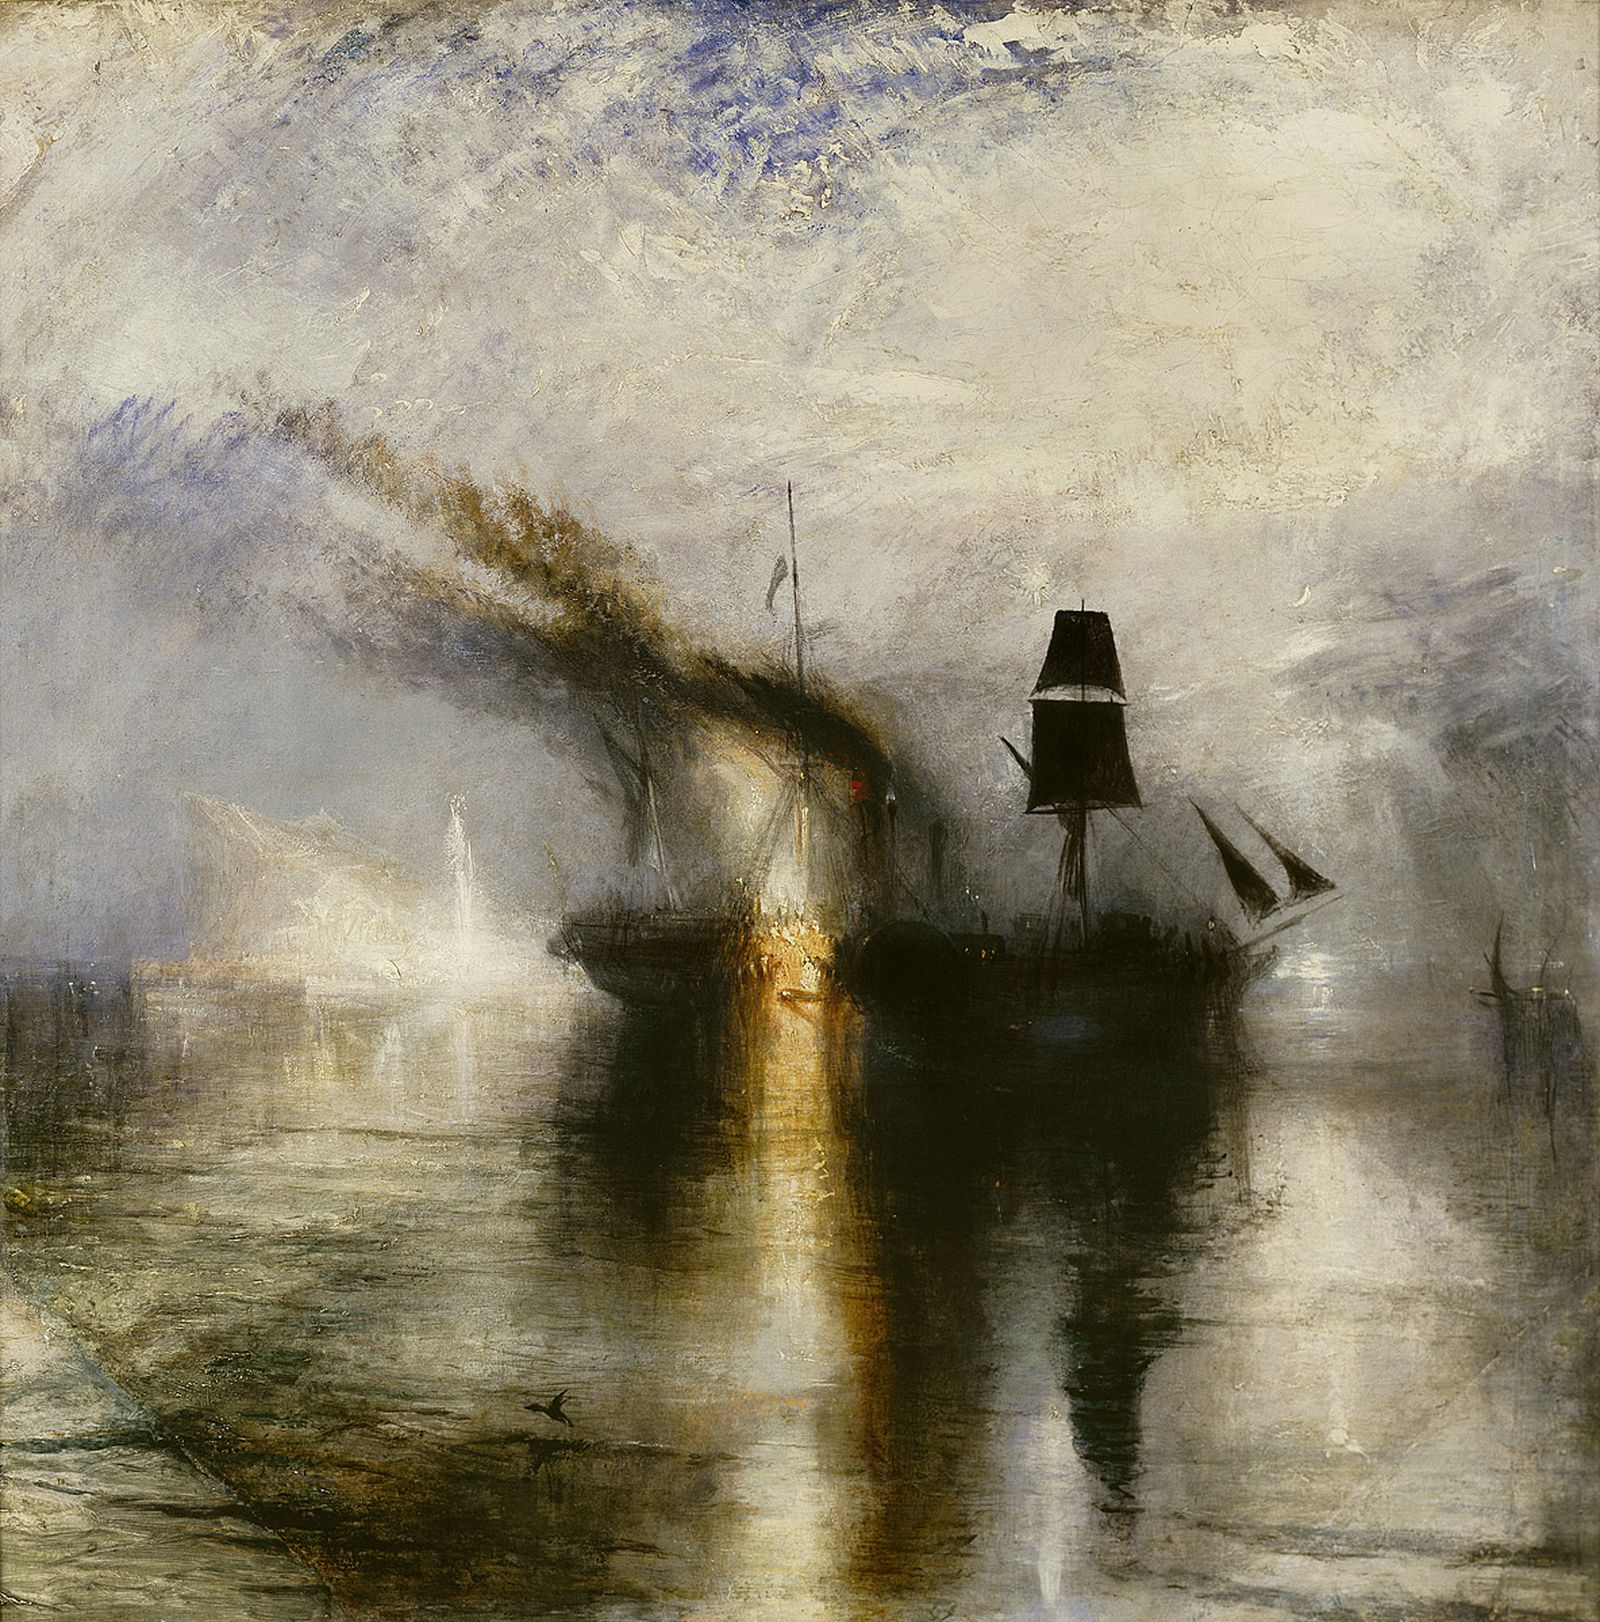 A ship burns in a harbour, surrounded by other ships